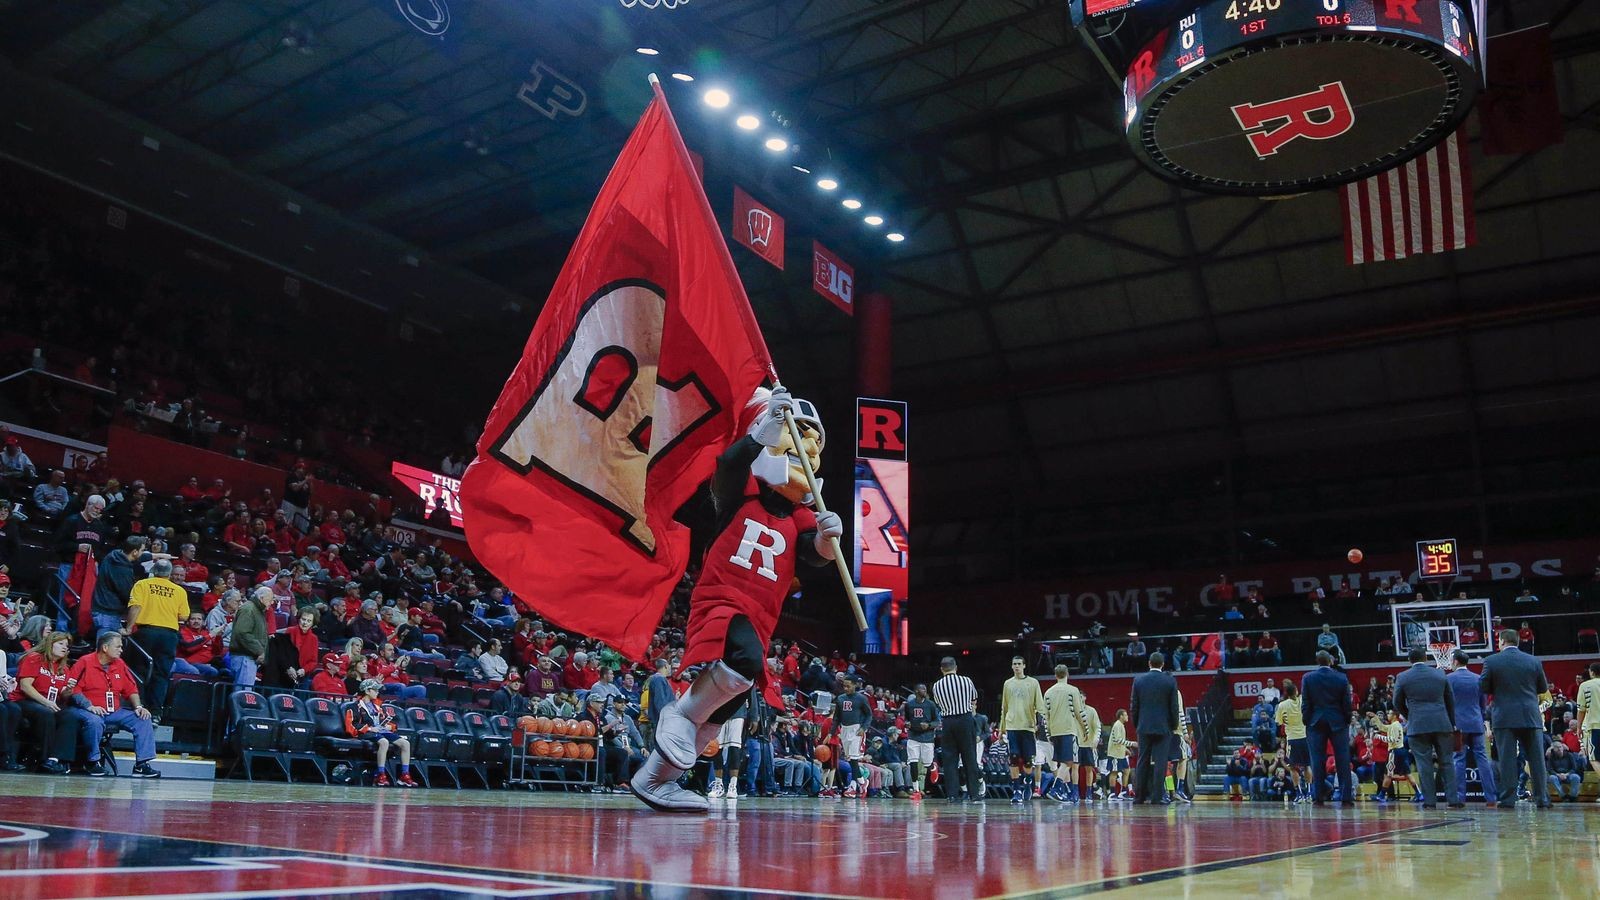 Rutgers Announces MidKnight Madness For Men’s & Women’s Basketball